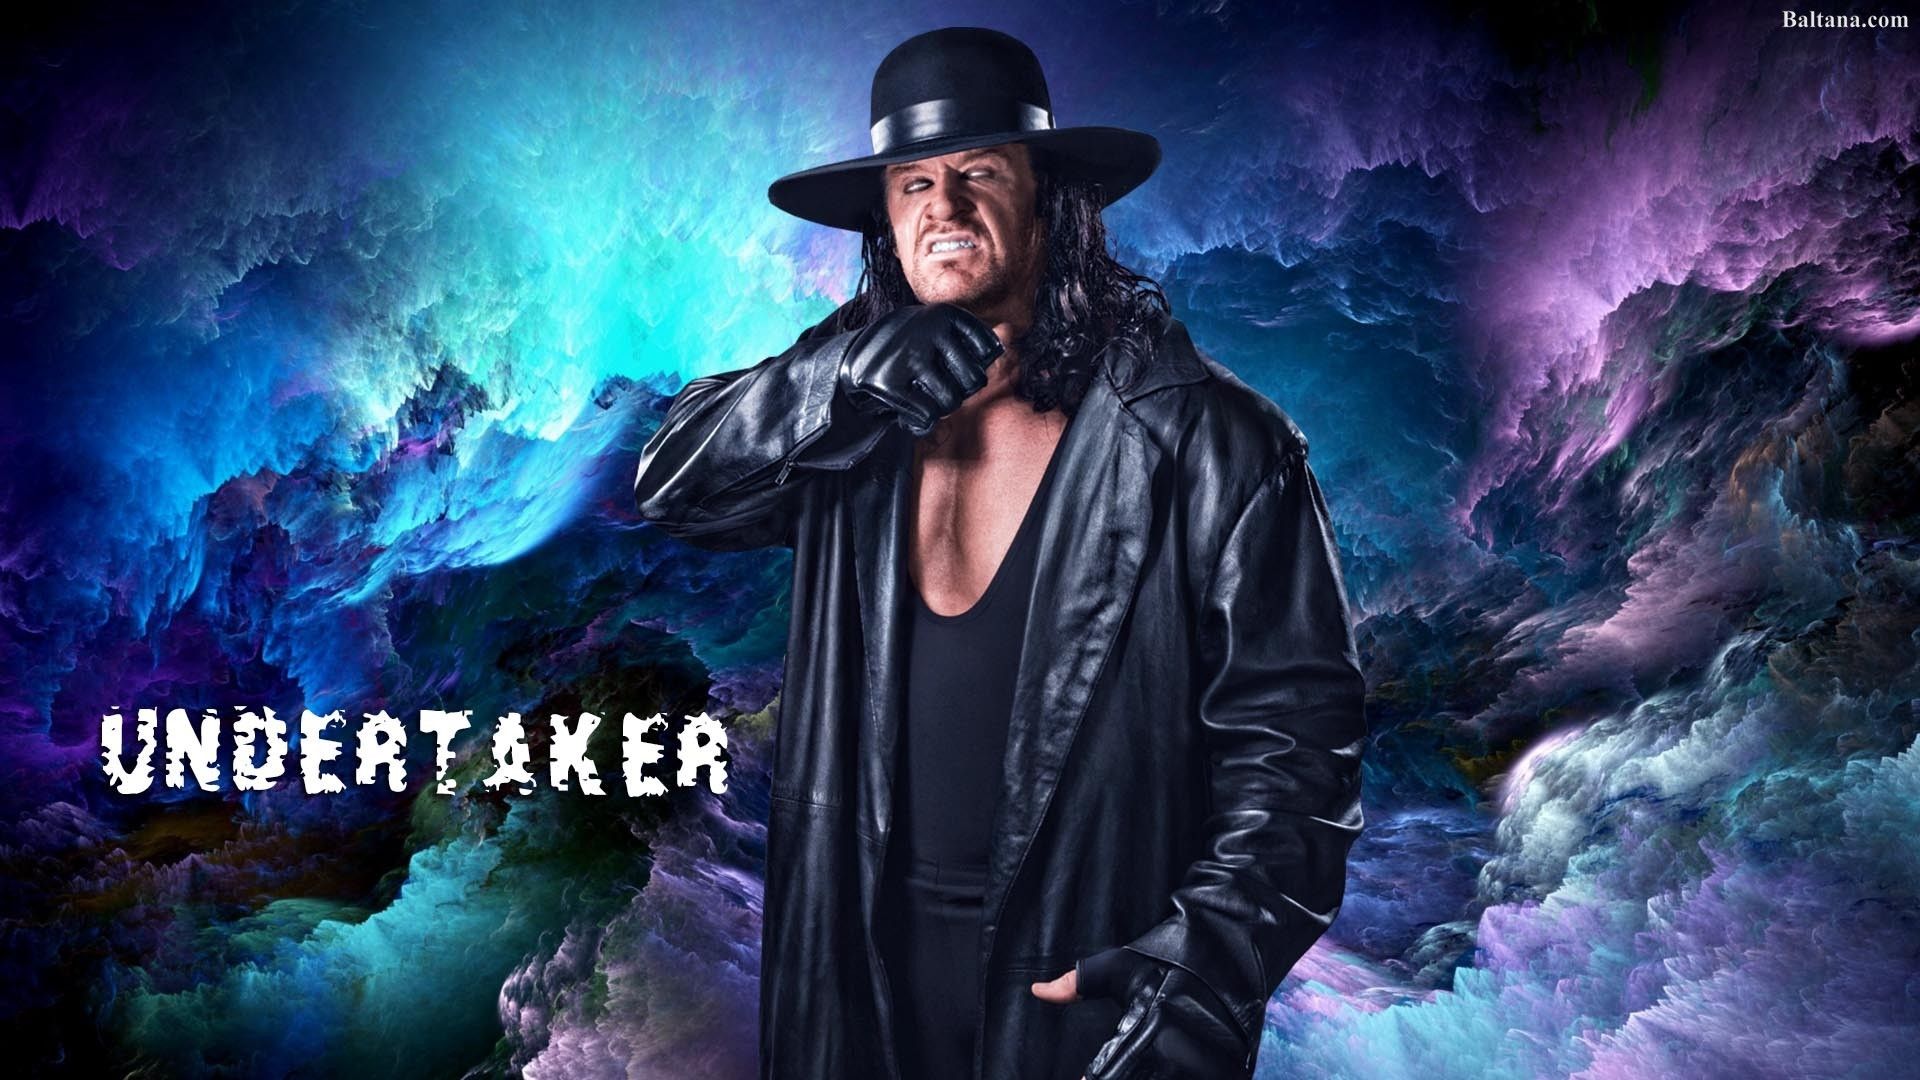 The Undertaker Wallpaper 2018 background picture